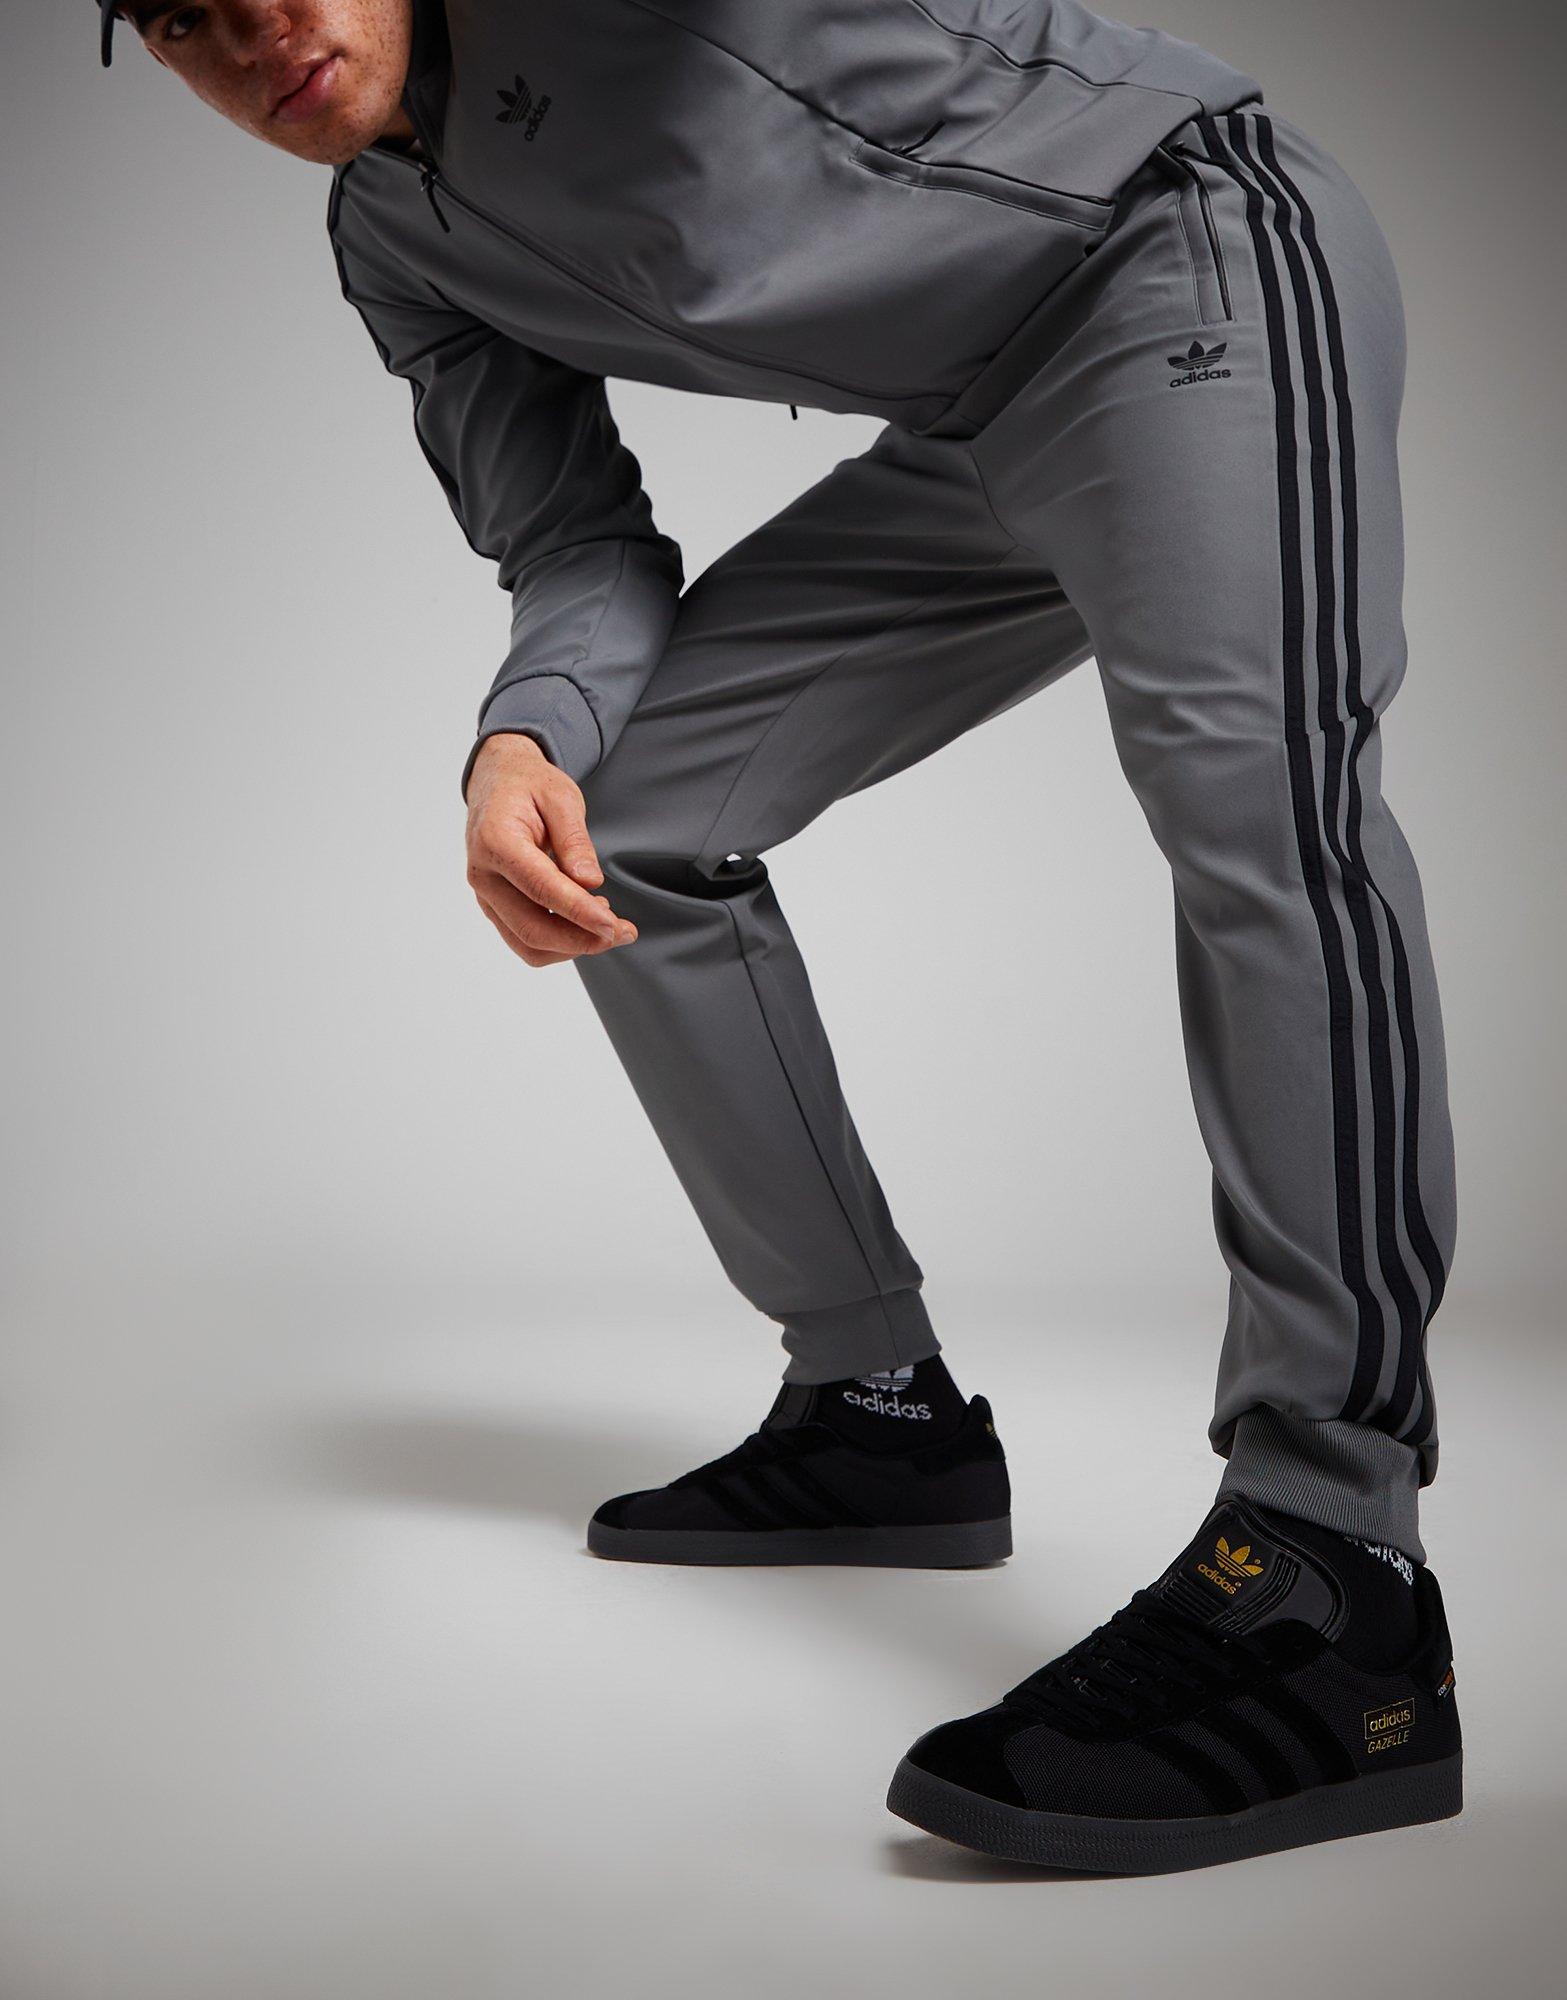 adidas Sst Track Pants (grey/white/tmvire)